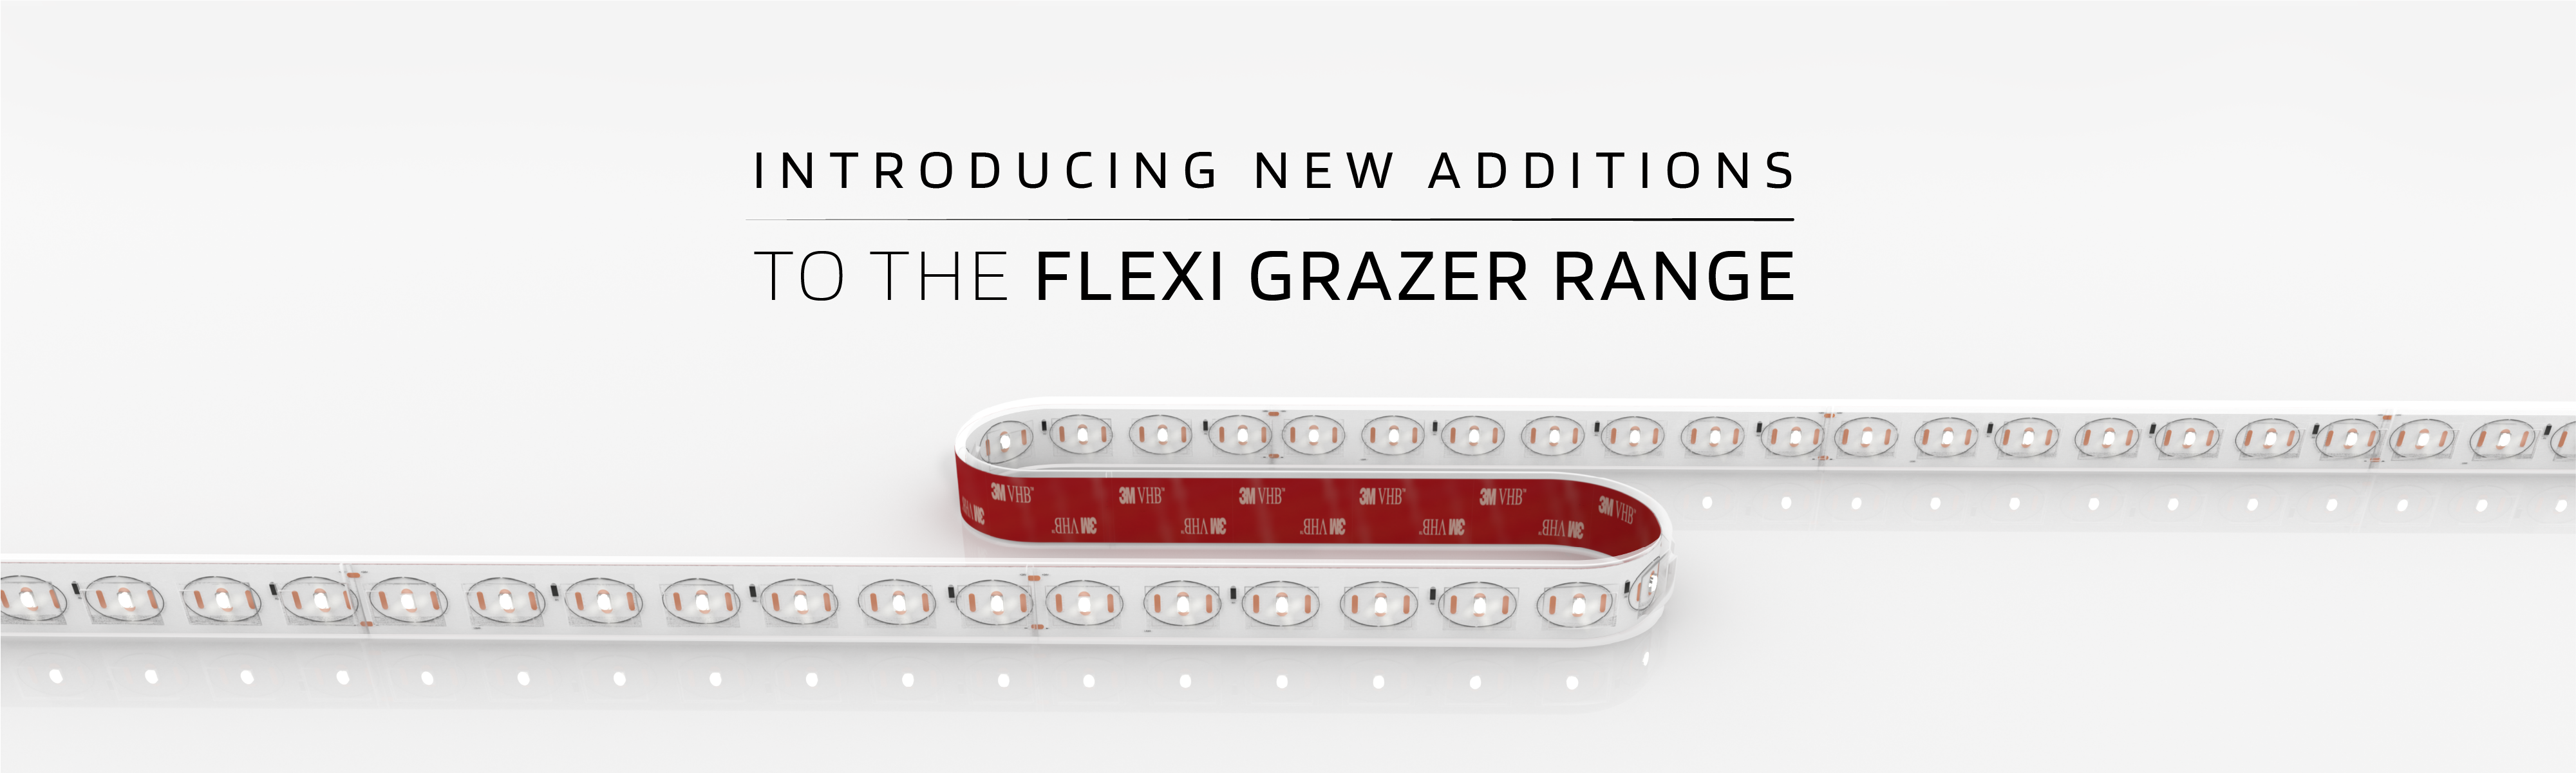 Introducing New Additions to the Flexi Grazer Range